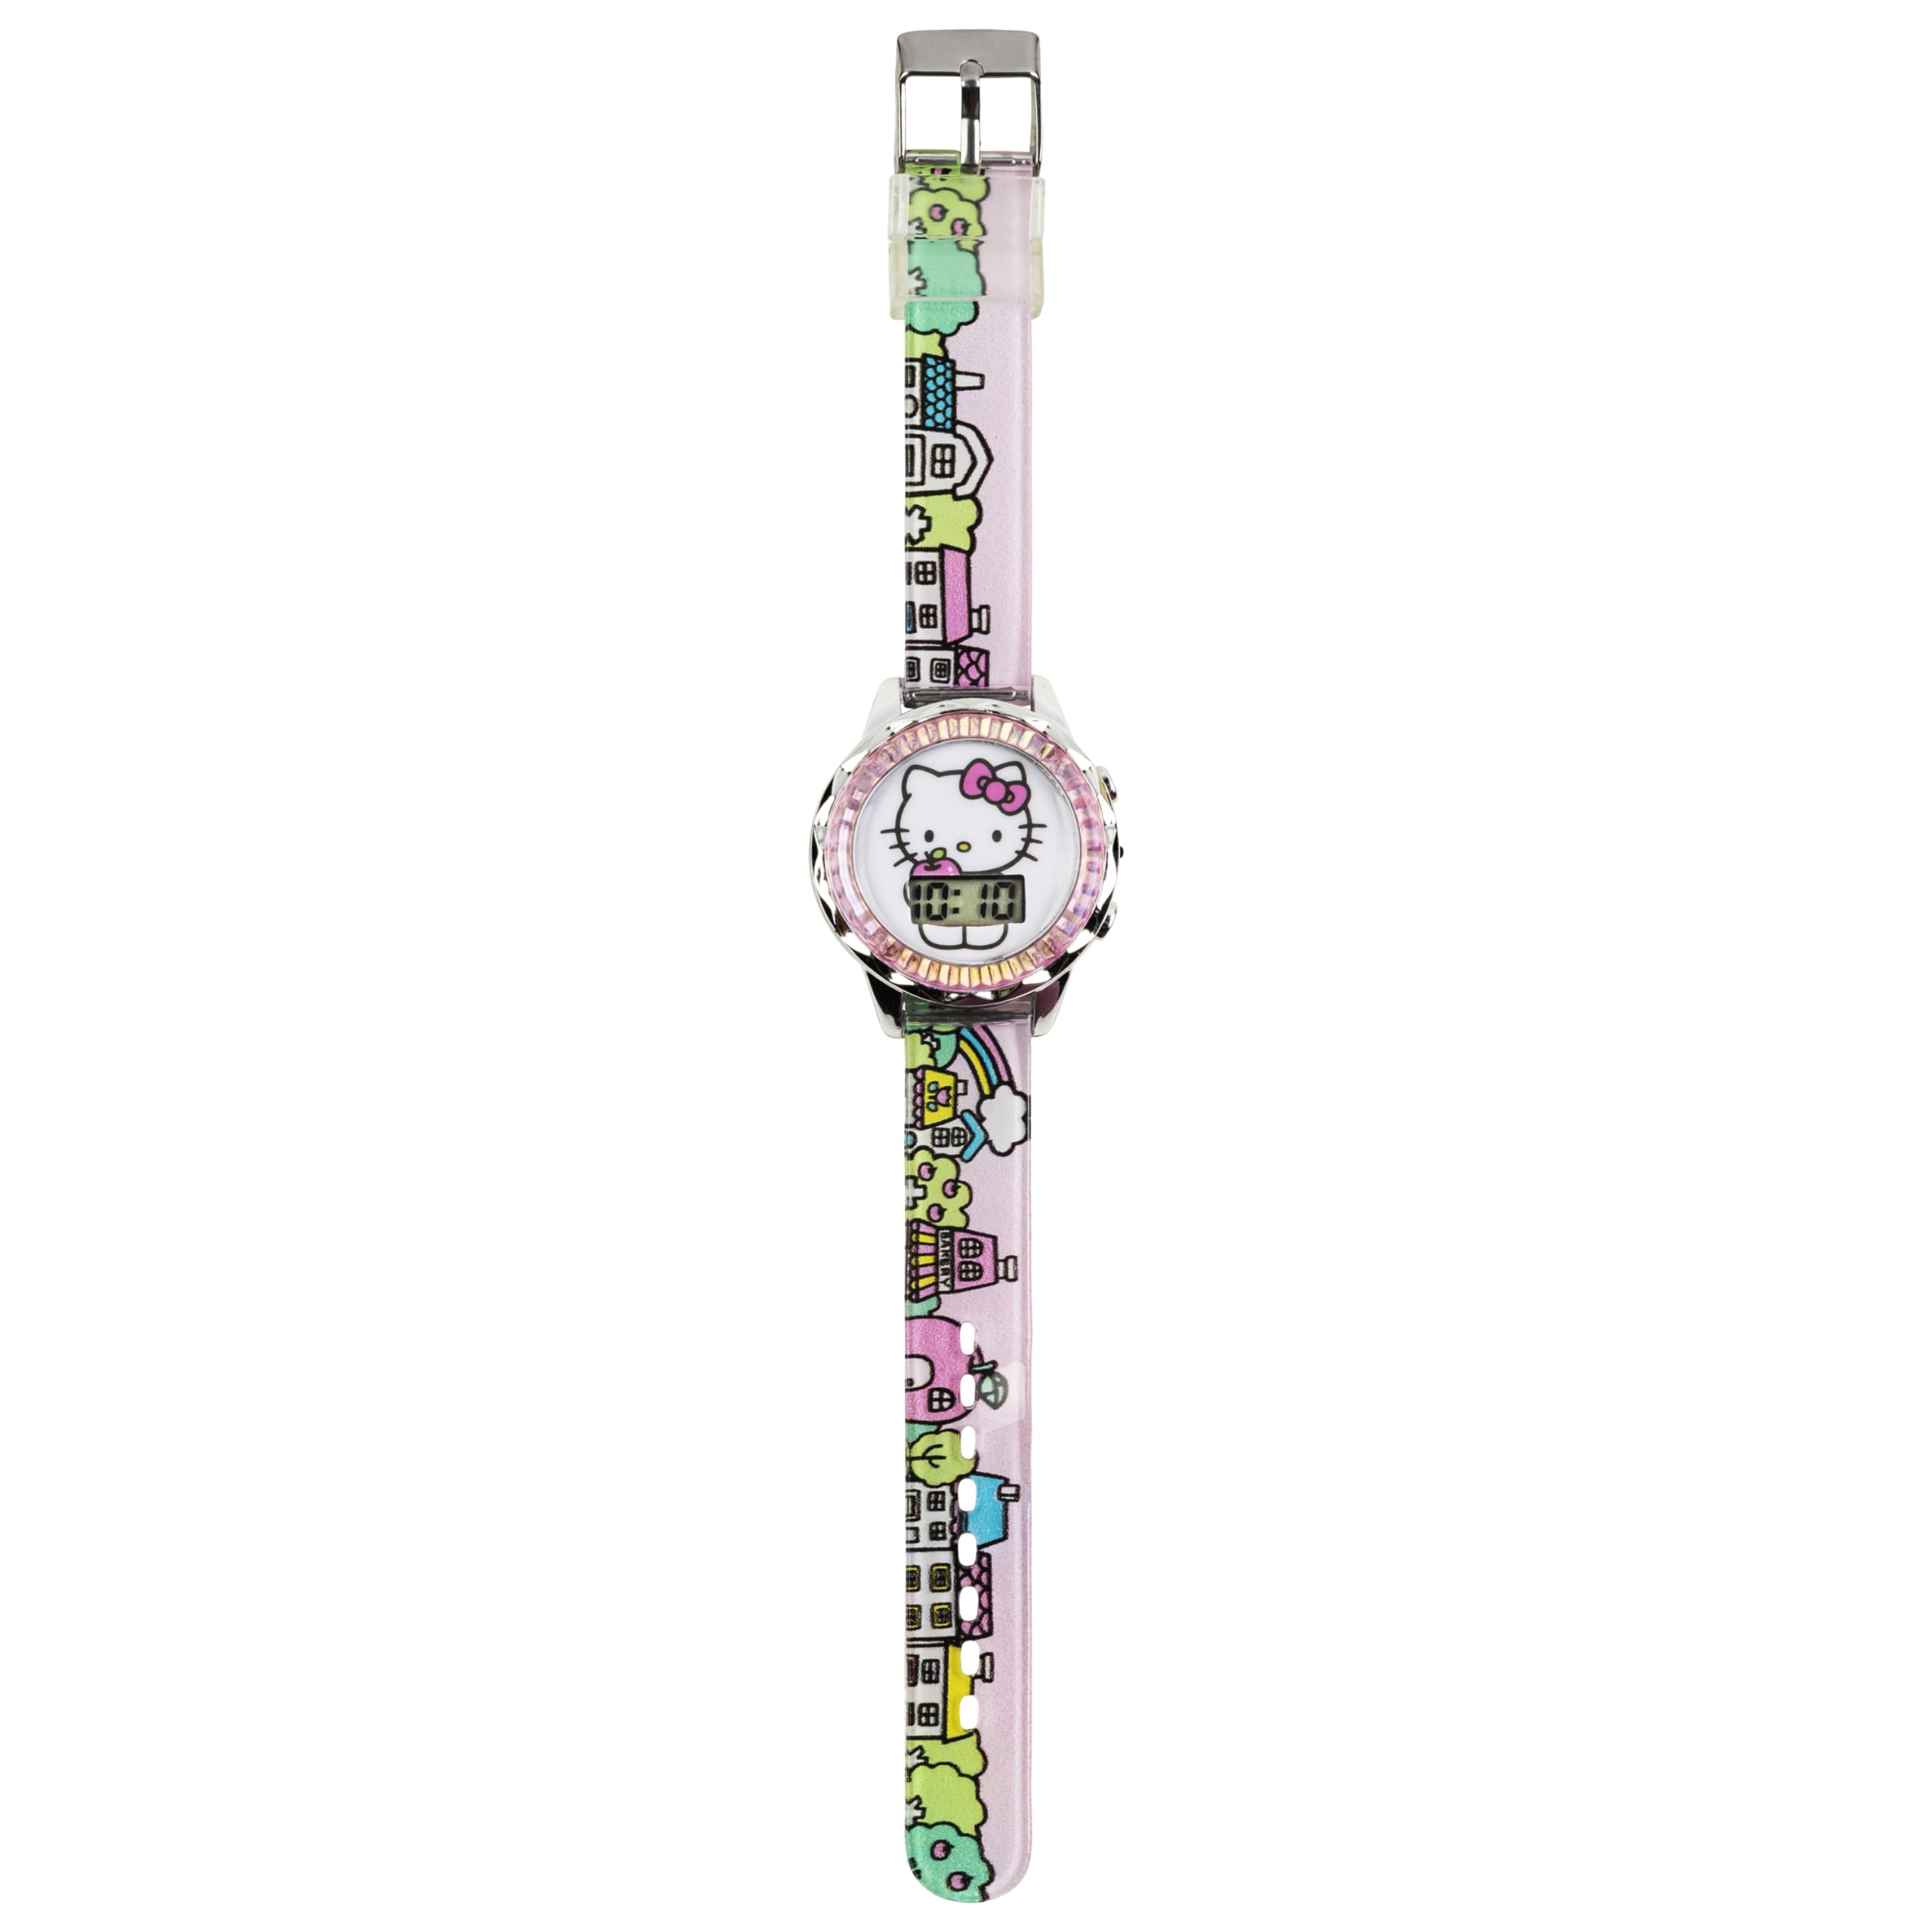 Accutime Hello Kitty Digital LCD Quartz Kids Pink Watch for Girls with All Over Print Band Strap (Model: HK4203AZ)